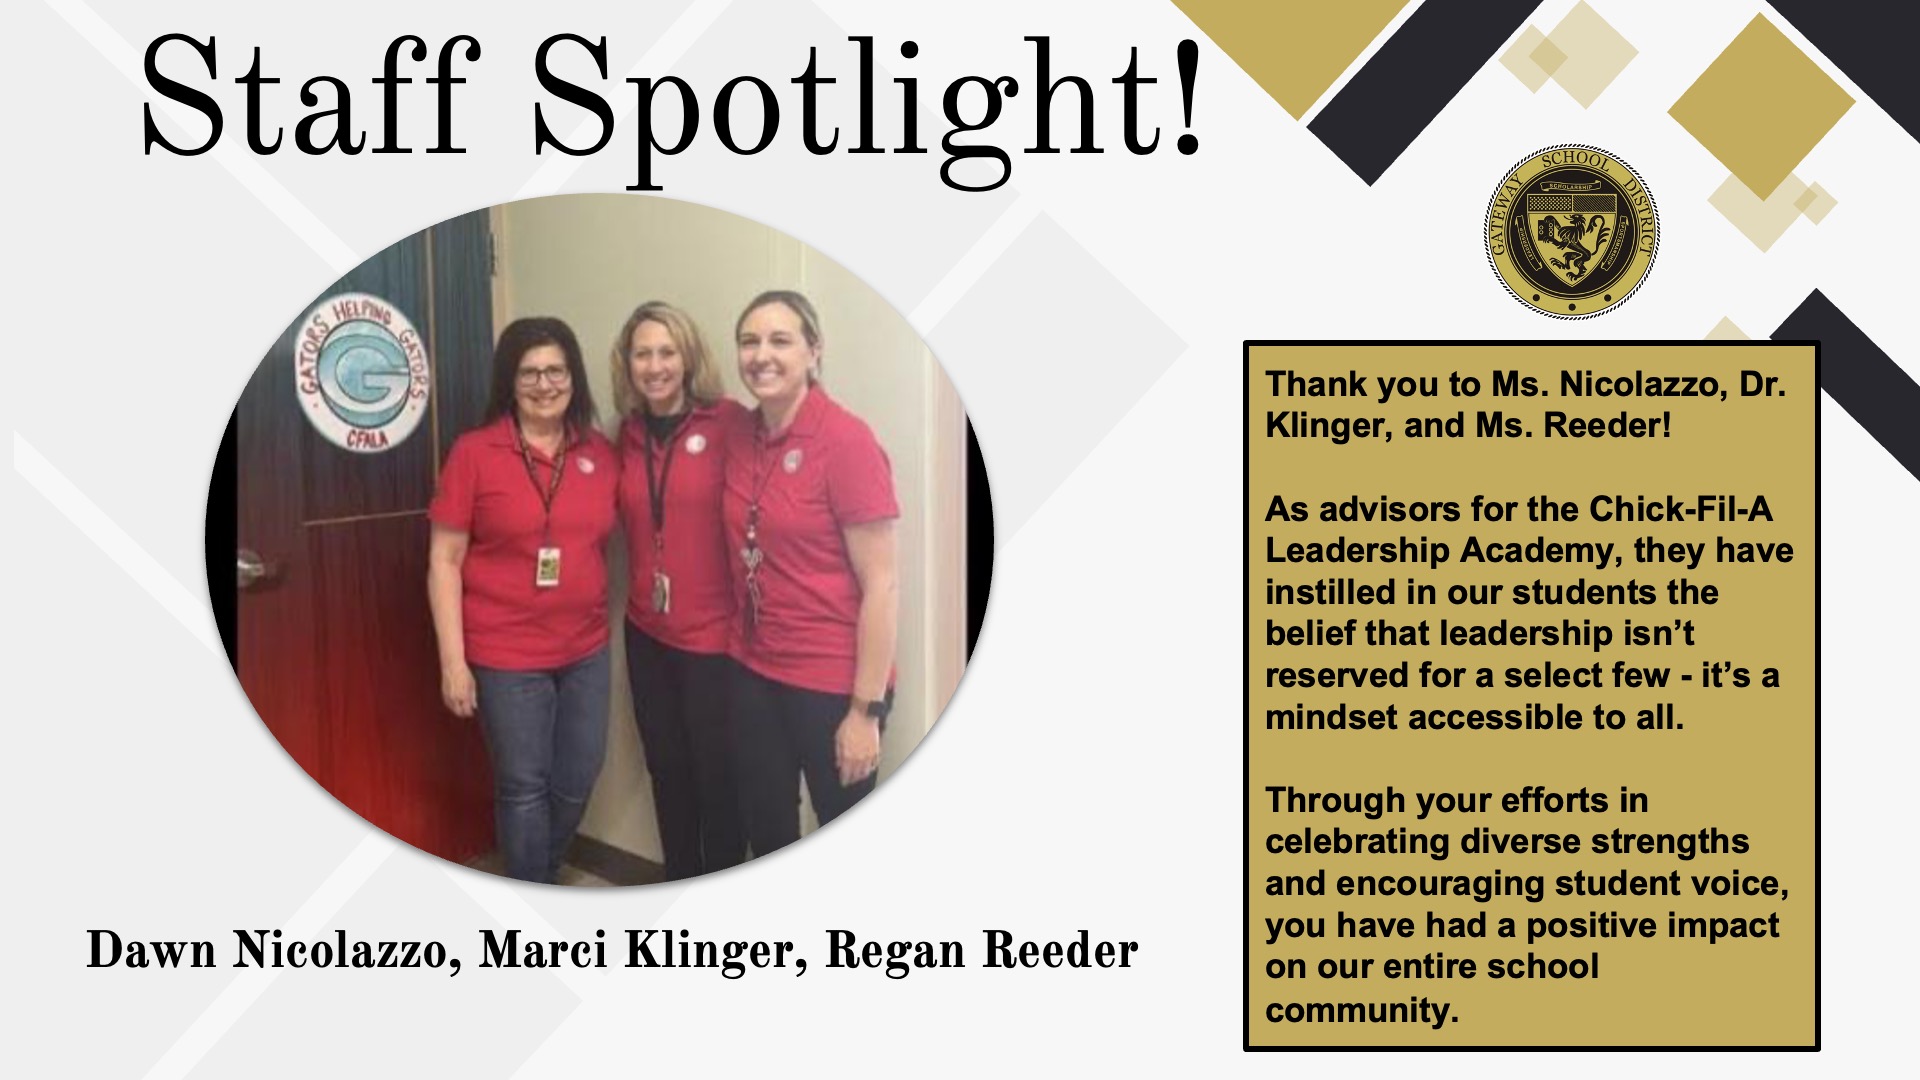 Thank you to Ms. Nicolazzo, Dr. Klinger, and Ms. Reeder!    As advisors for the Chick-Fil-A Leadership Academy, they have instilled in our students the belief that leadership isn’t reserved for a select few - it’s a mindset accessible to all.    Through your efforts in celebrating diverse strengths and encouraging student voice, you have had a positive impact on our entire school community.  